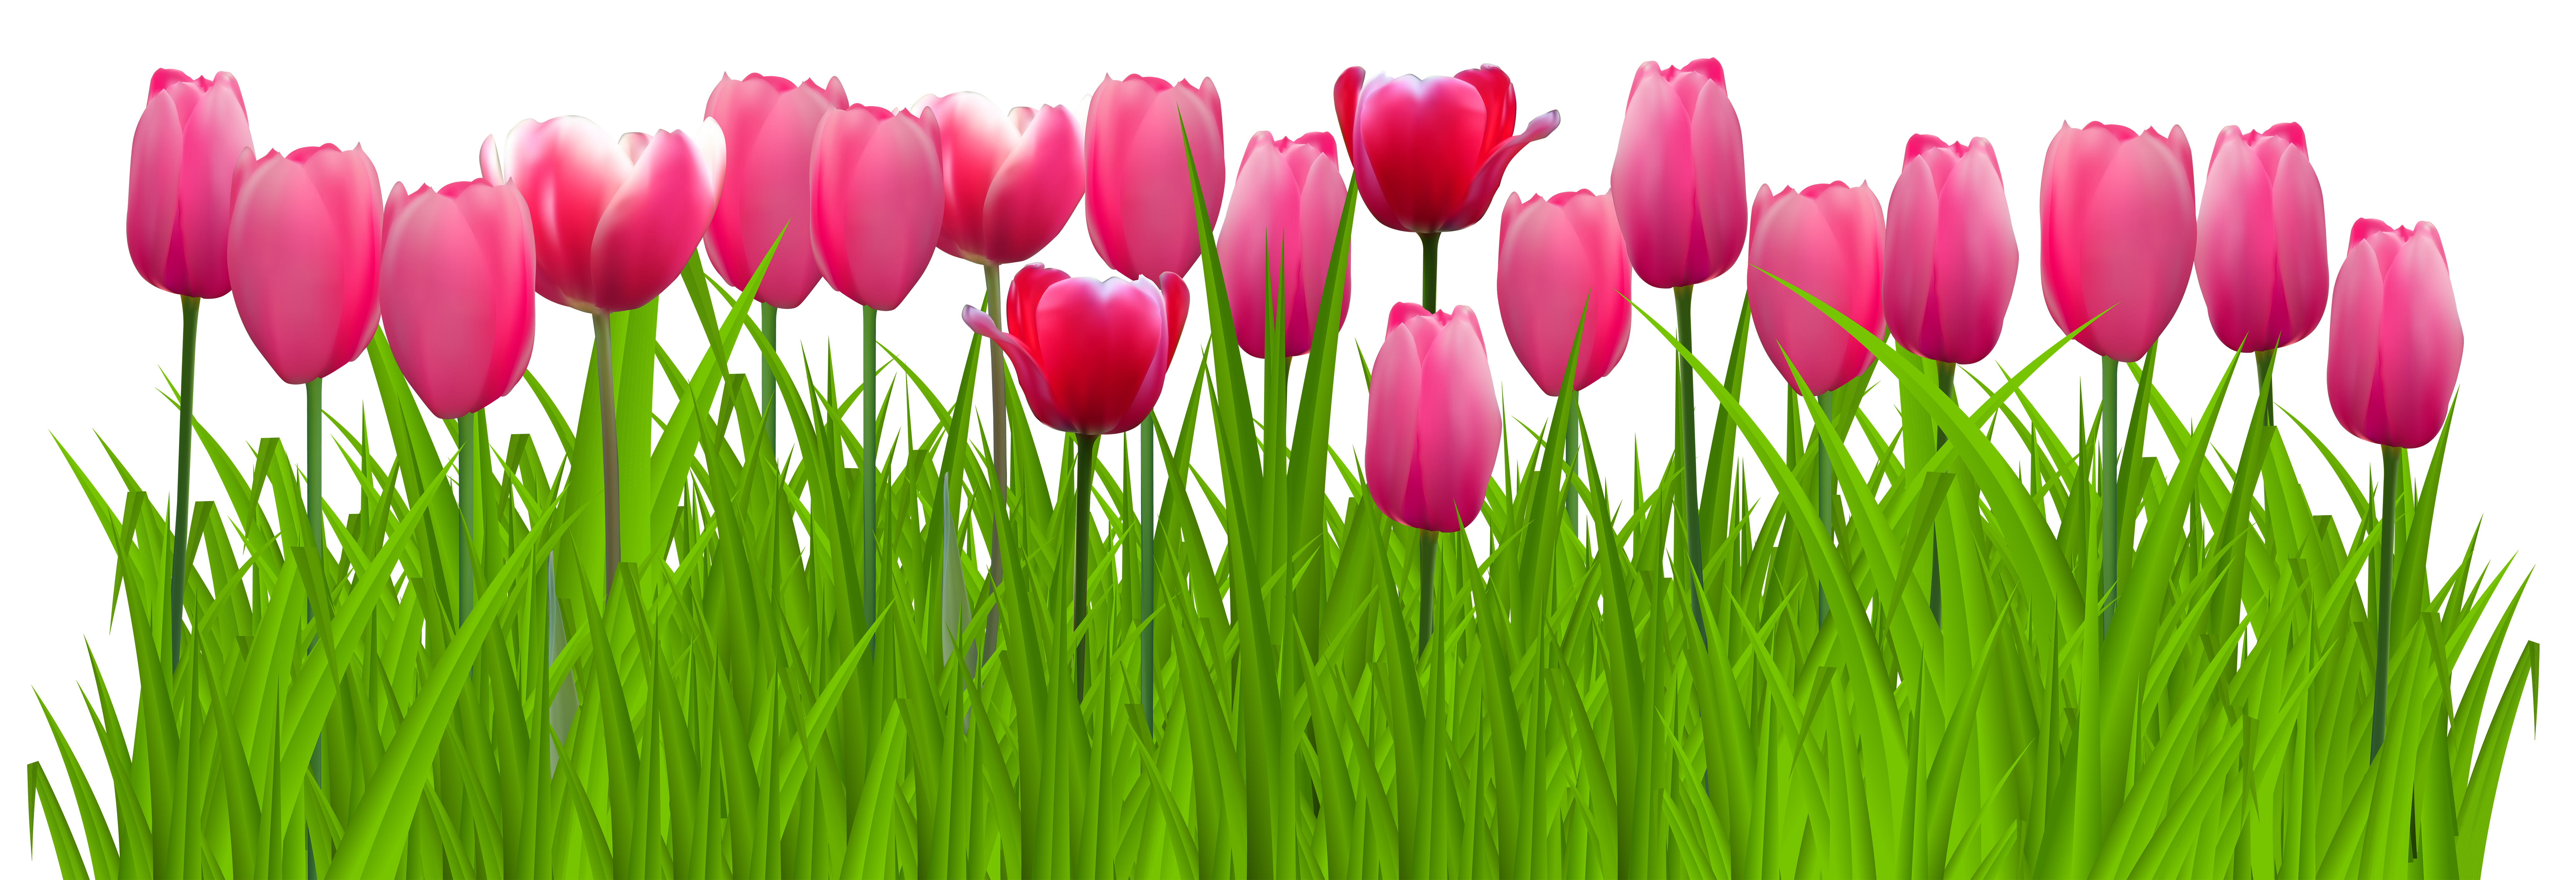 Grass With Colorful Tulips Png Clipart Tulip Border. Snowjet.co 